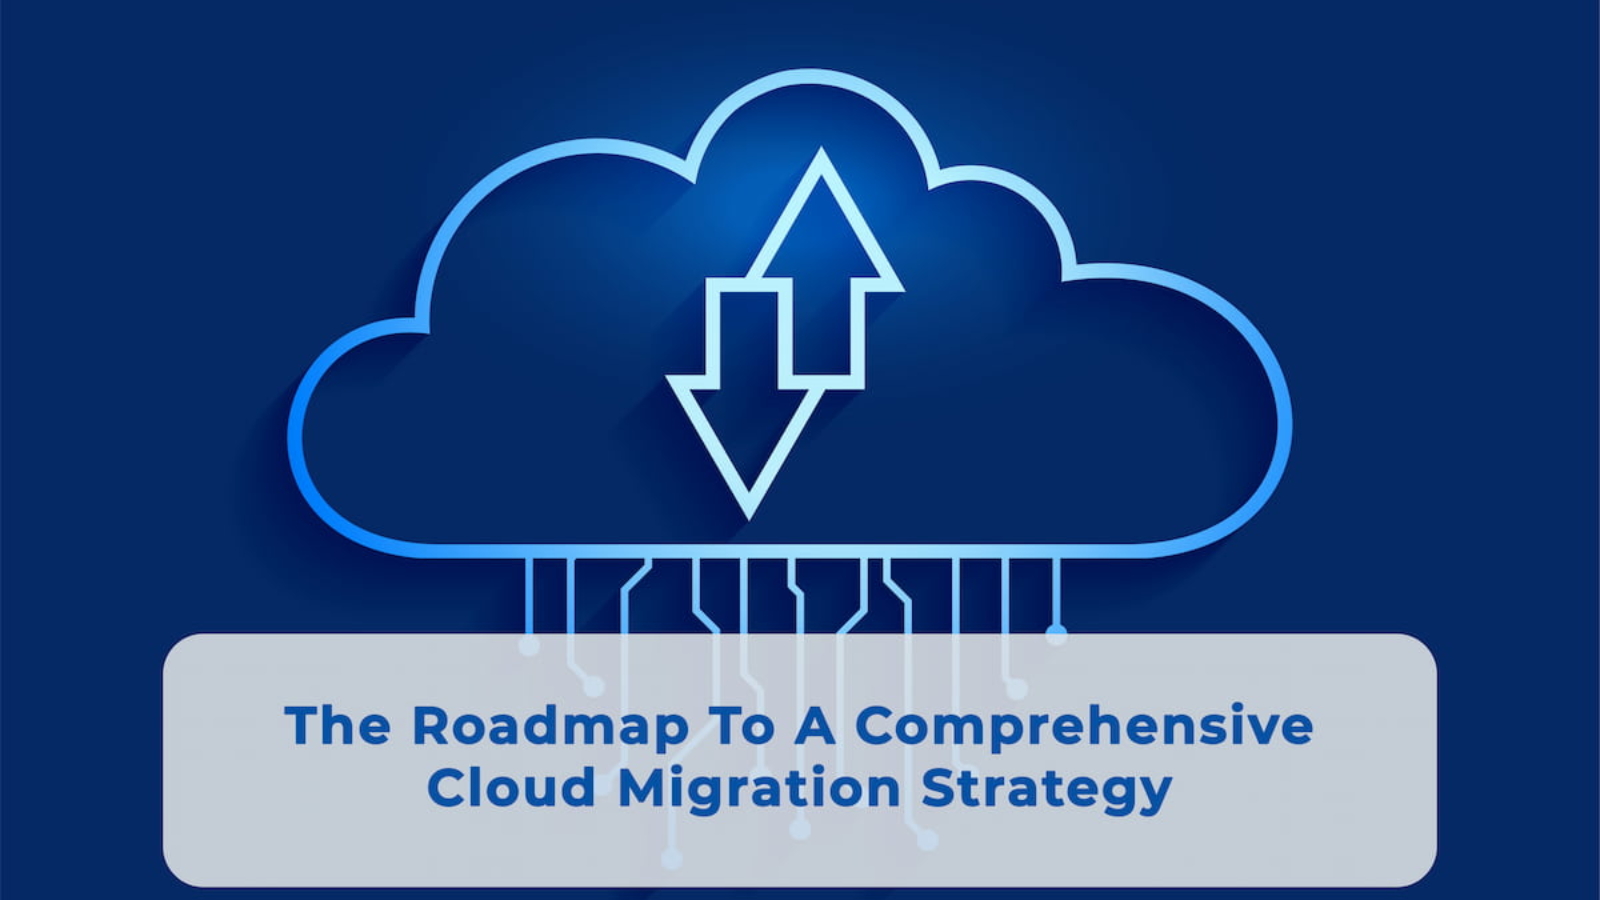 The Roadmap To A Comprehensive Cloud Migration Strategy